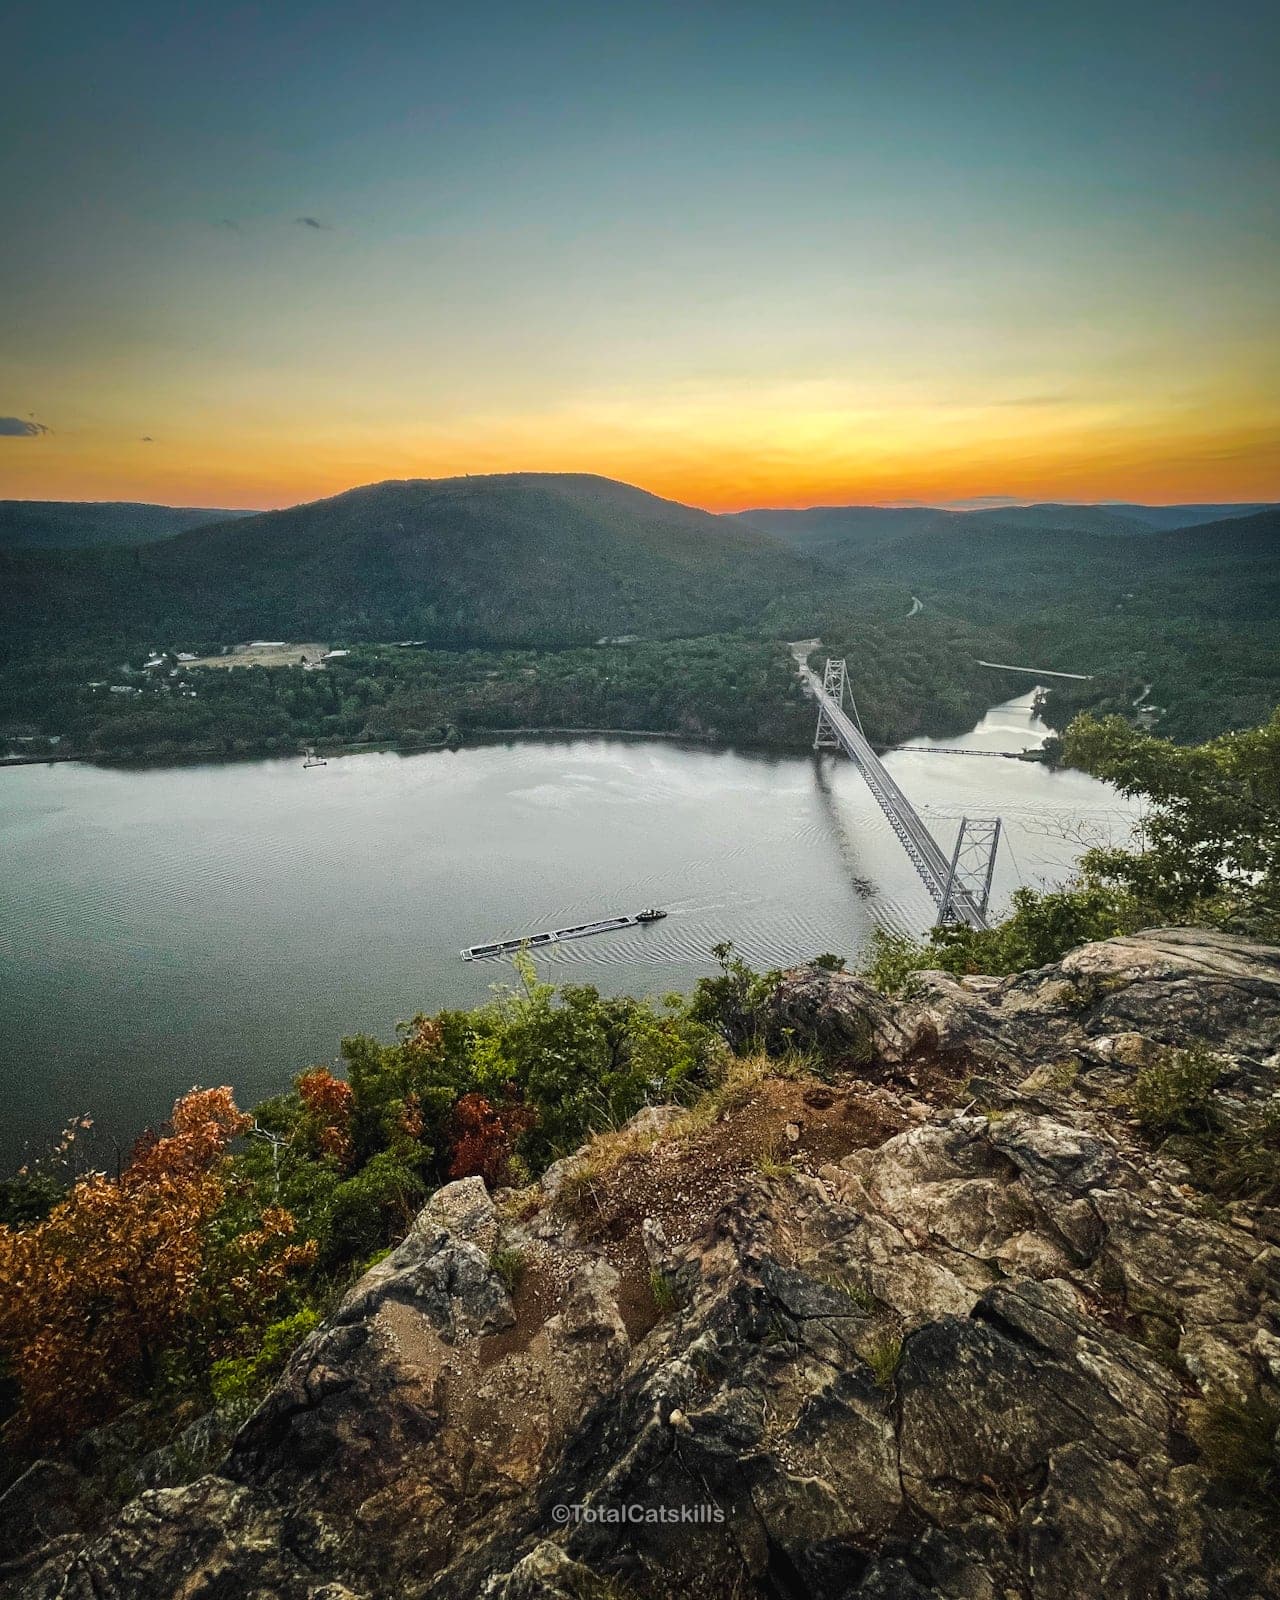 bear mountain bridge seen from Anthony’s Nose just after sunset